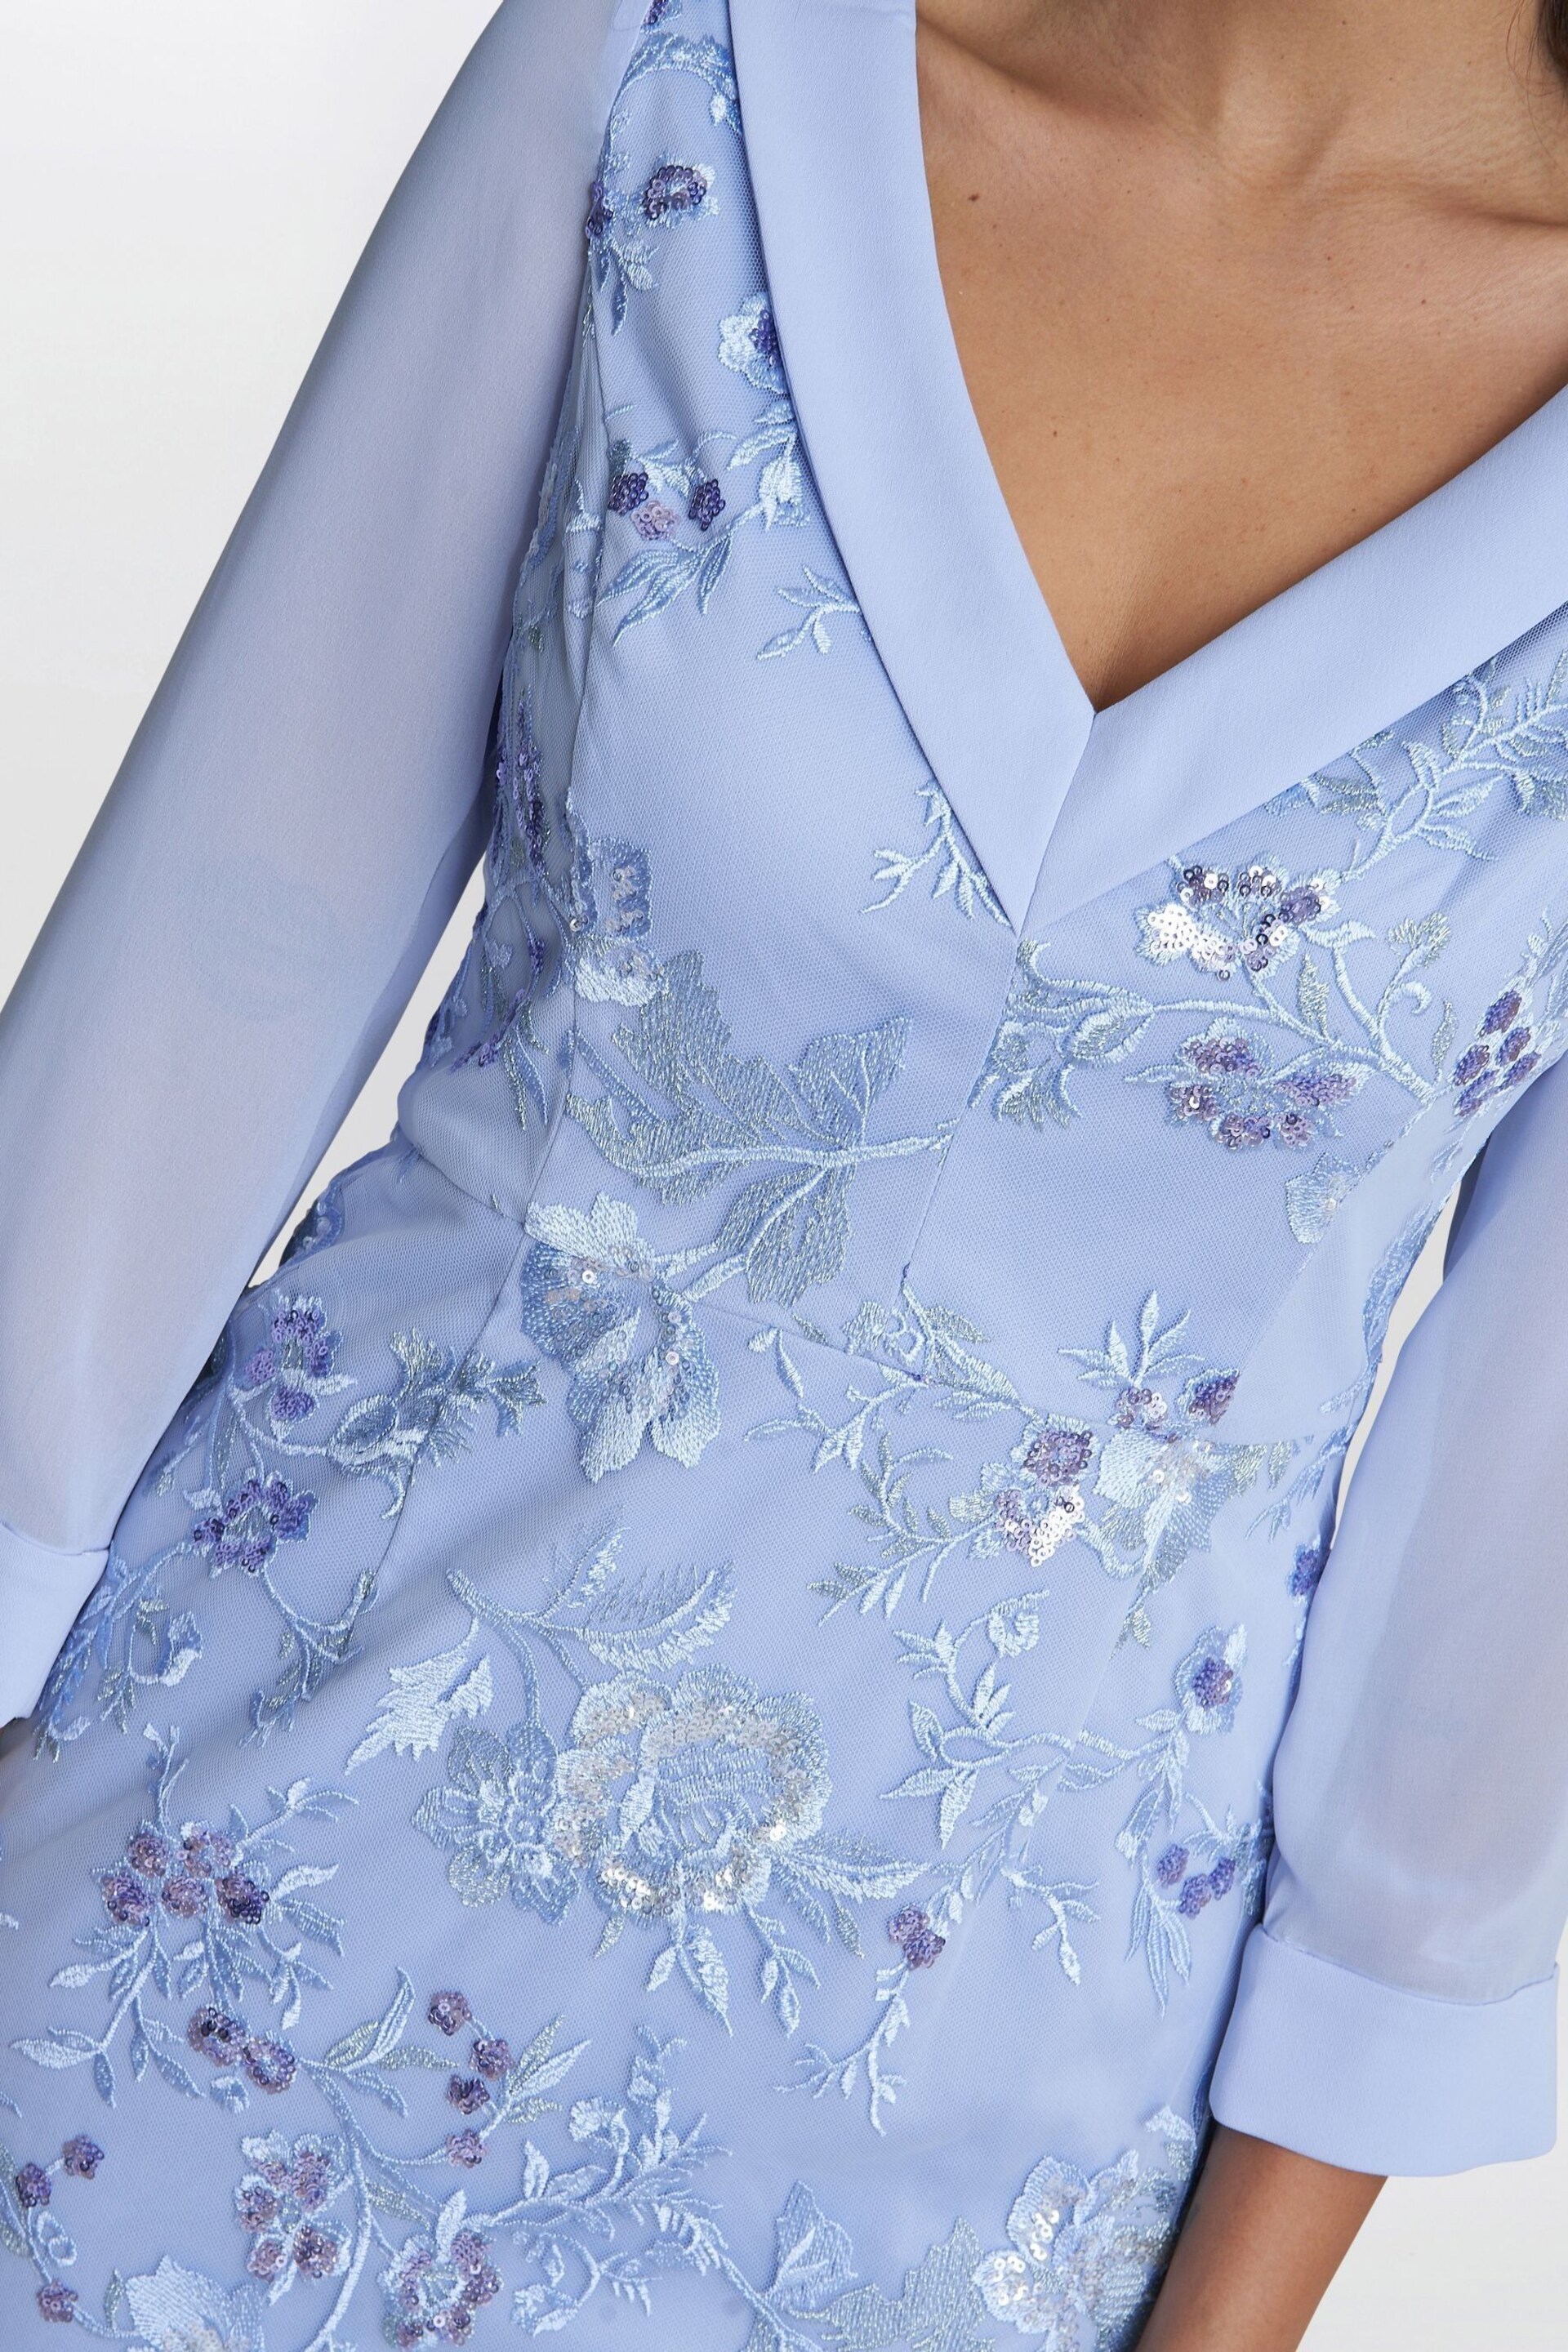 Gina Bacconi Blue Daisy Crepe Dress With Embroidery - Image 4 of 6